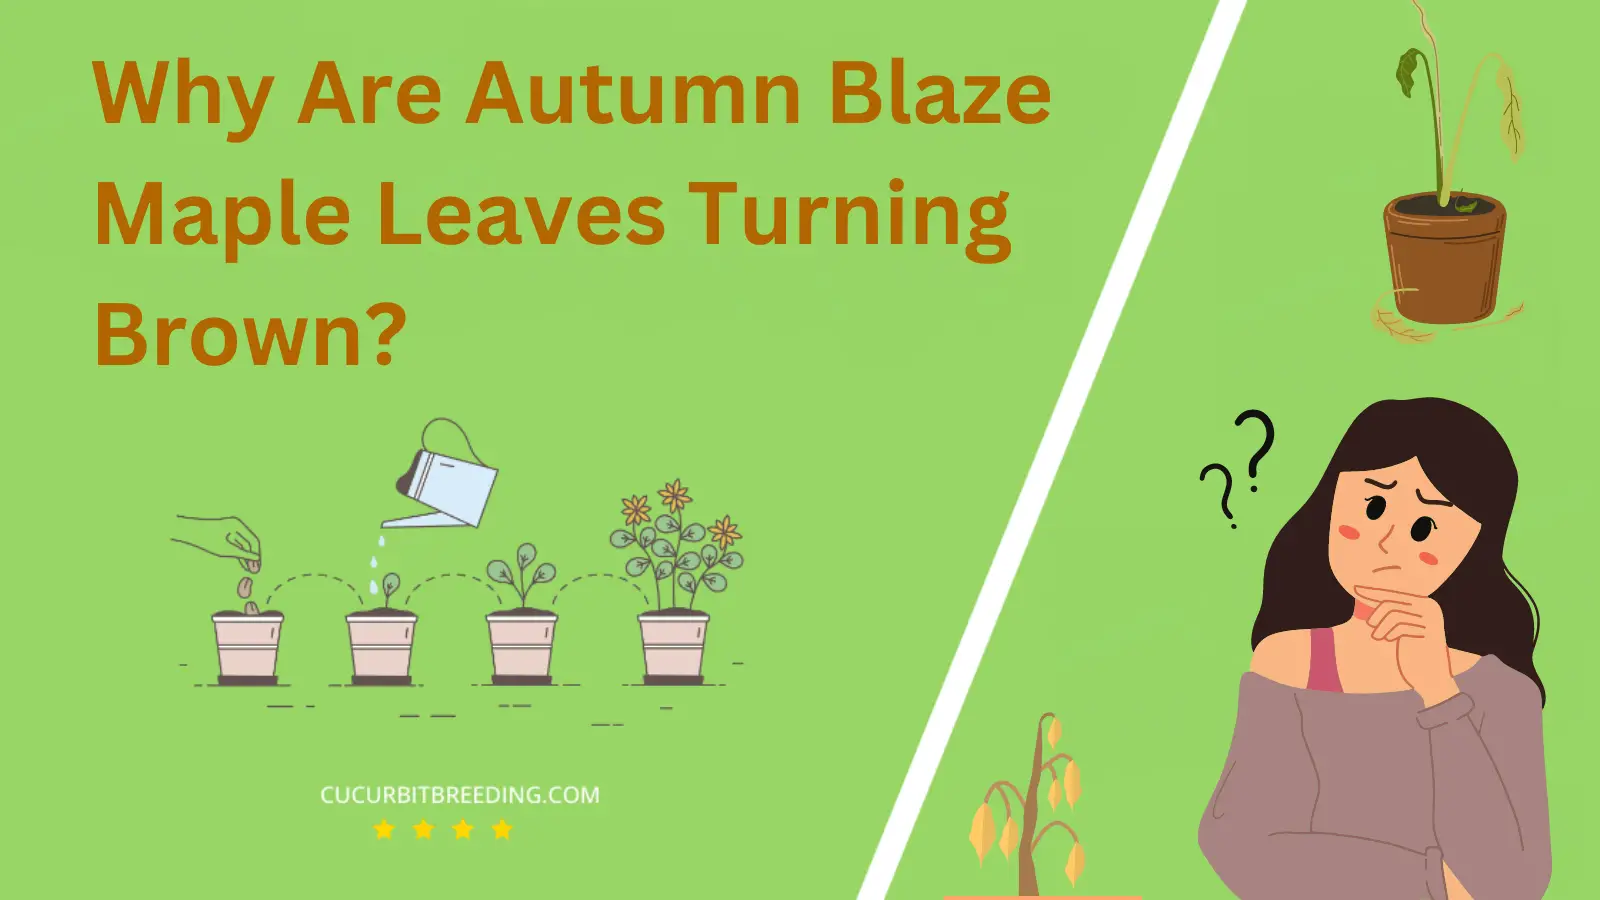 Why Are Autumn Blaze Maple Leaves Turning Brown